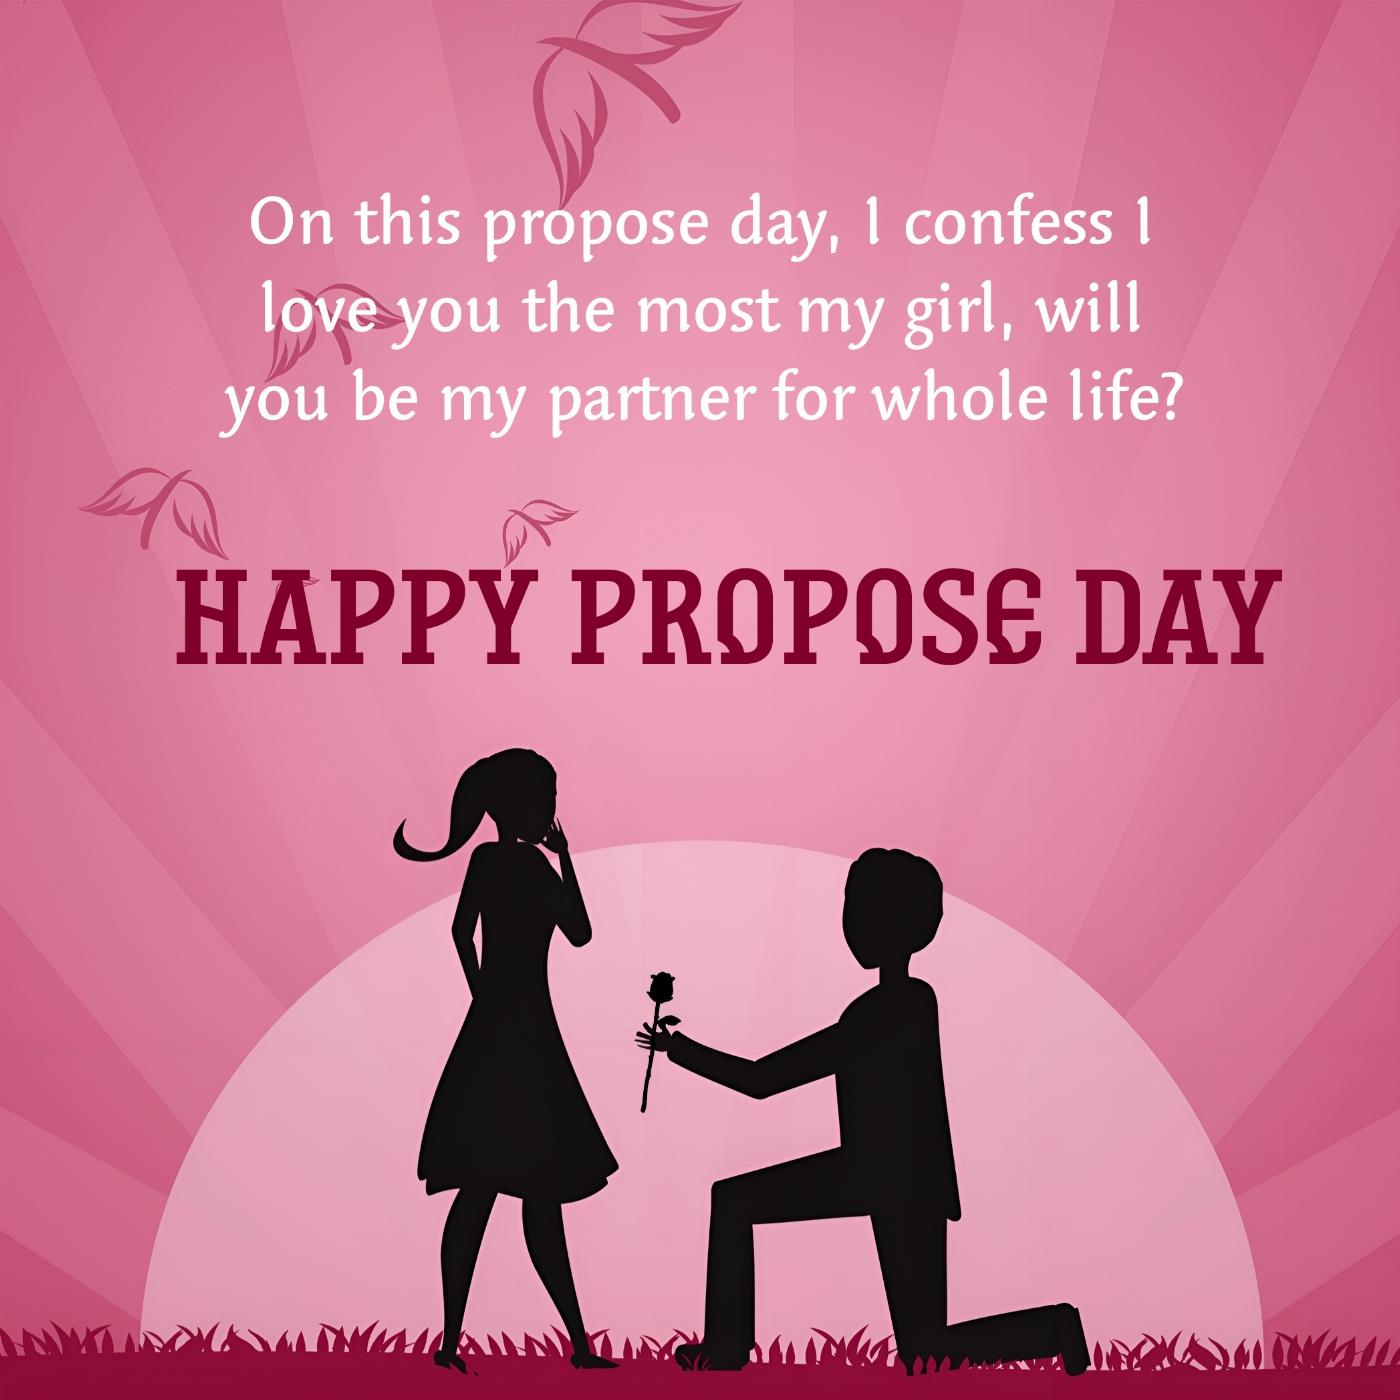 On this propose day I confess I love you the most my girl